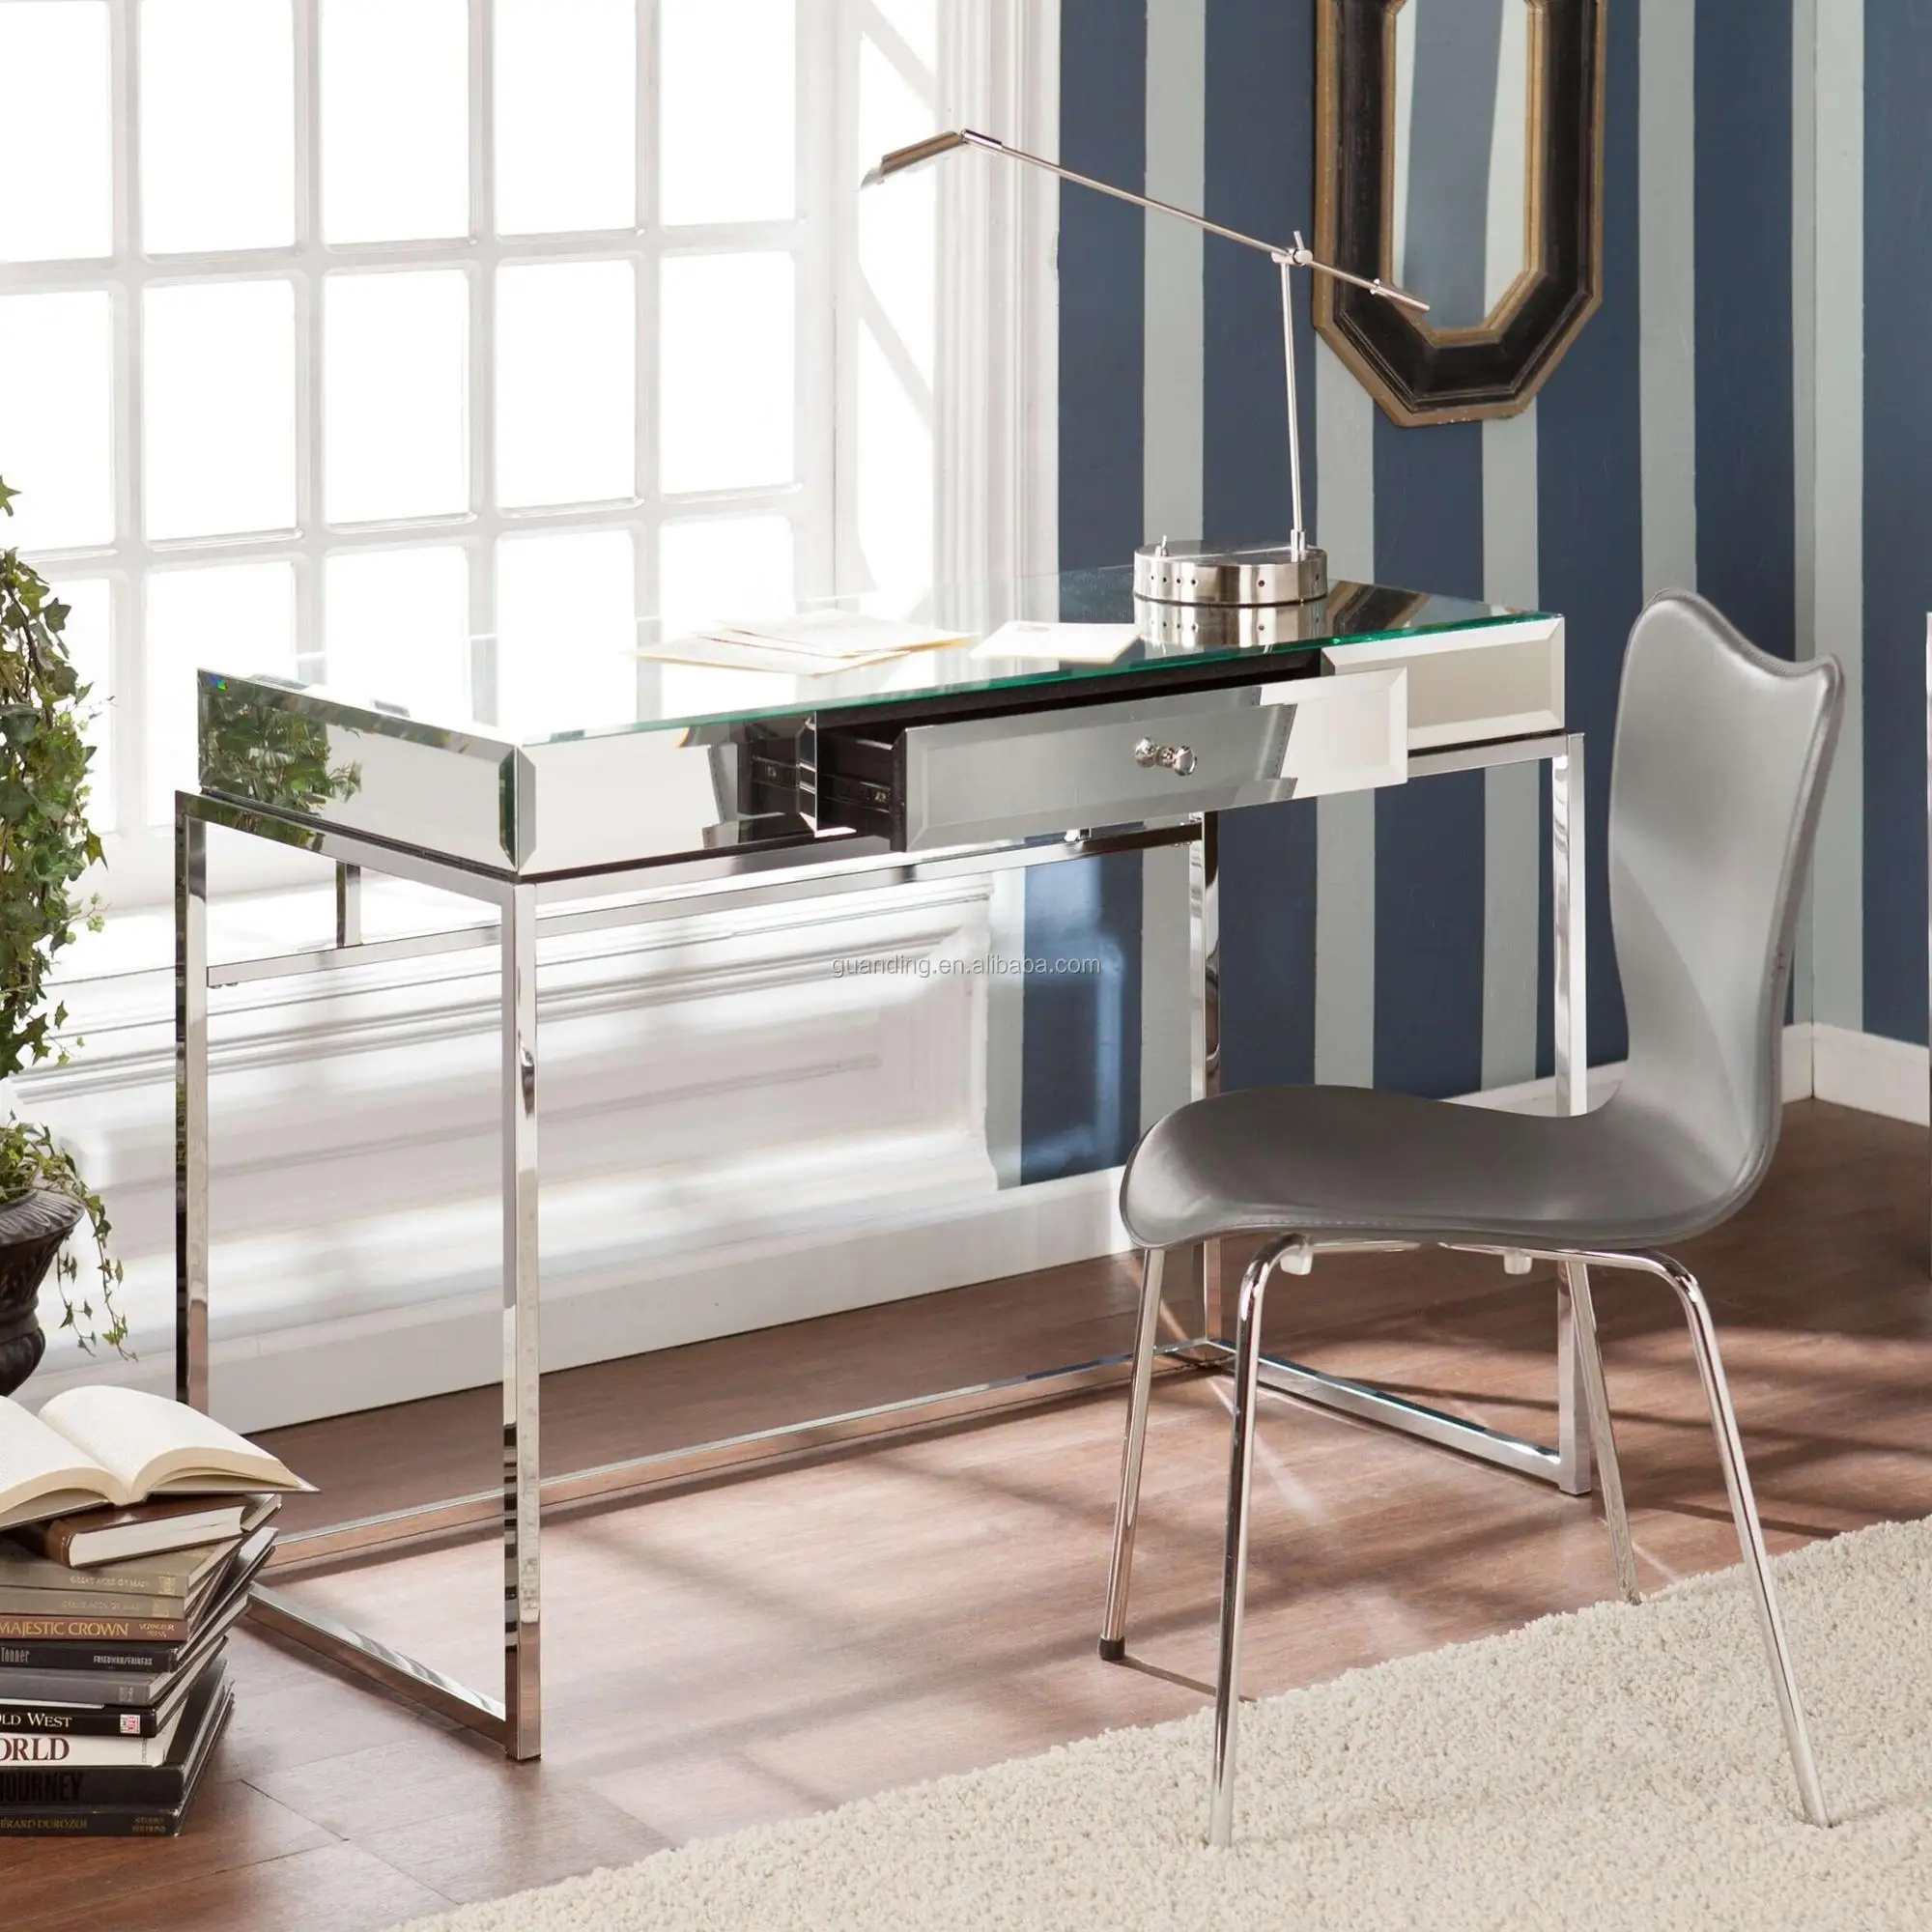 Featured image of post Mirrored Corner Console Table - A diy mirrored console table to rival any high end furniture.